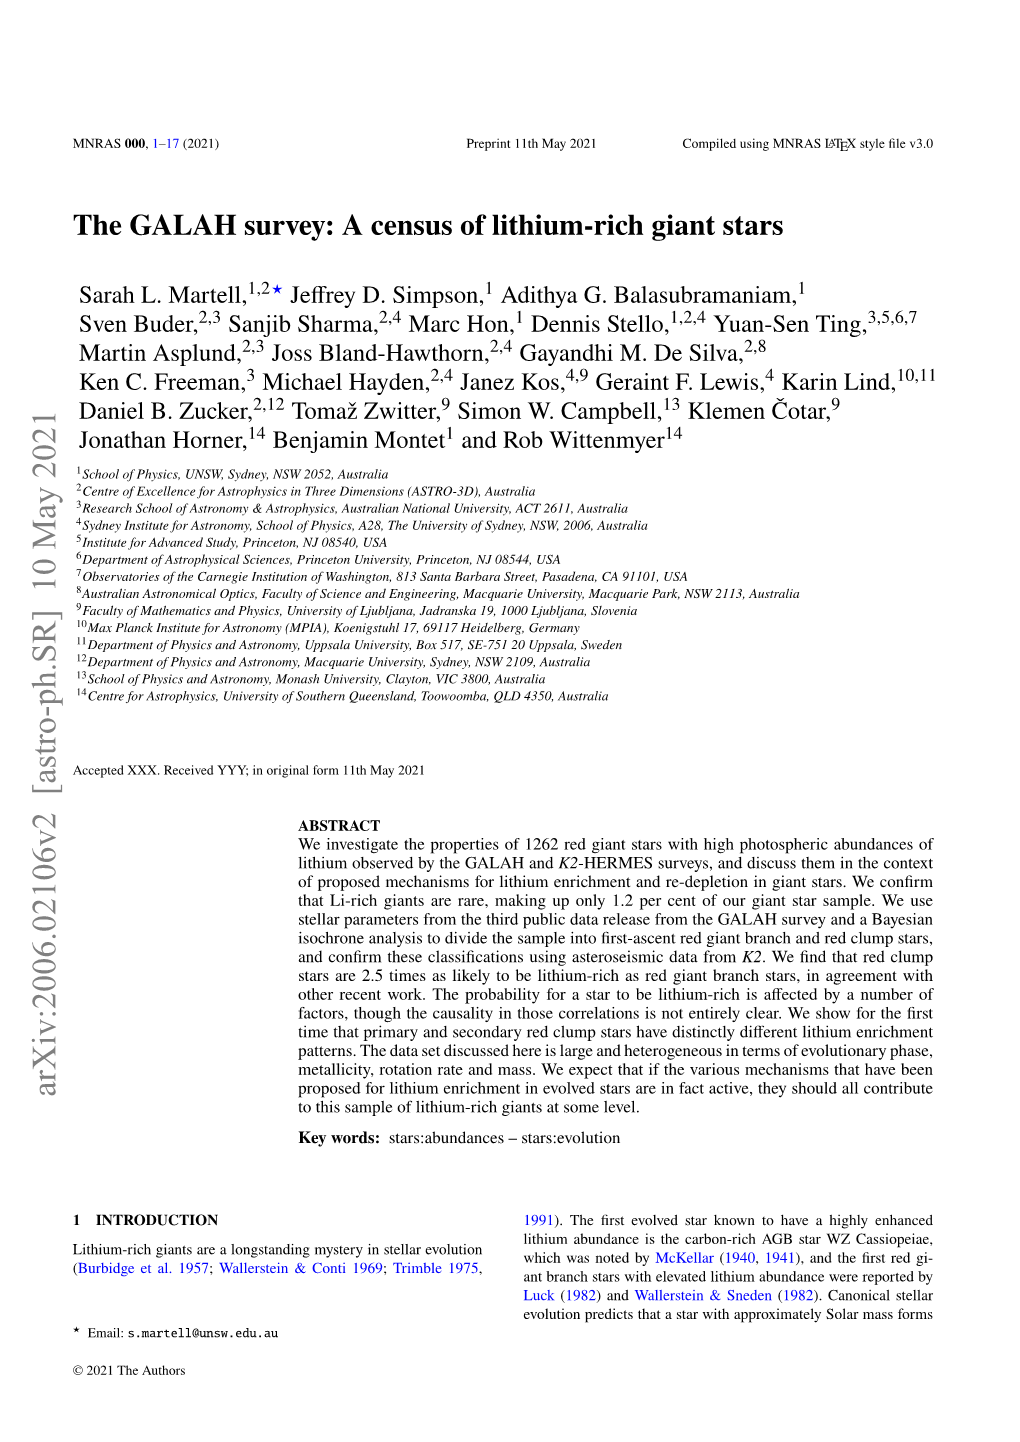 The GALAH Survey: a Census of Lithium-Rich Giant Stars